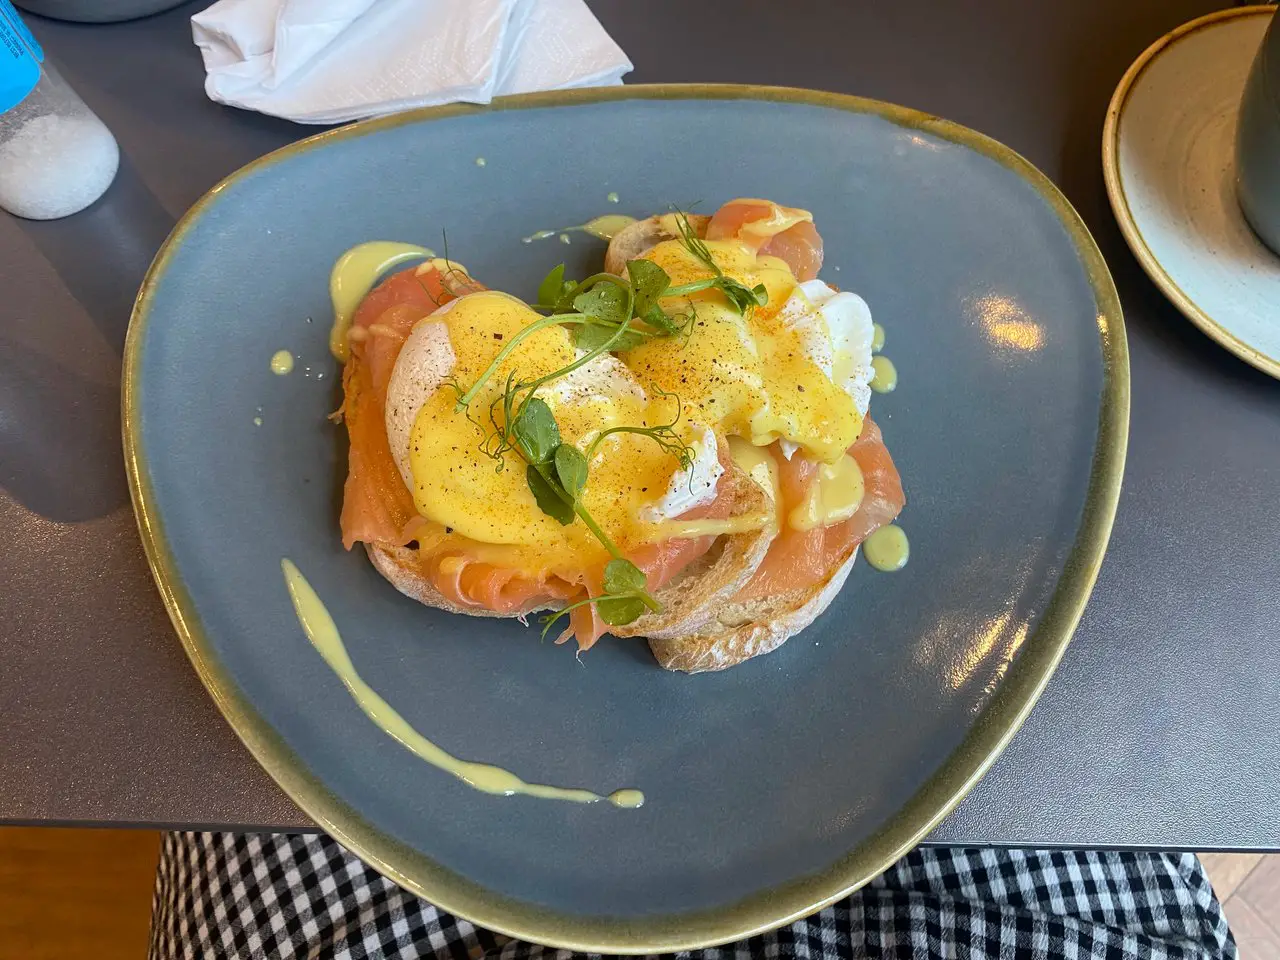 Smoked salmon benedict on a blue plate